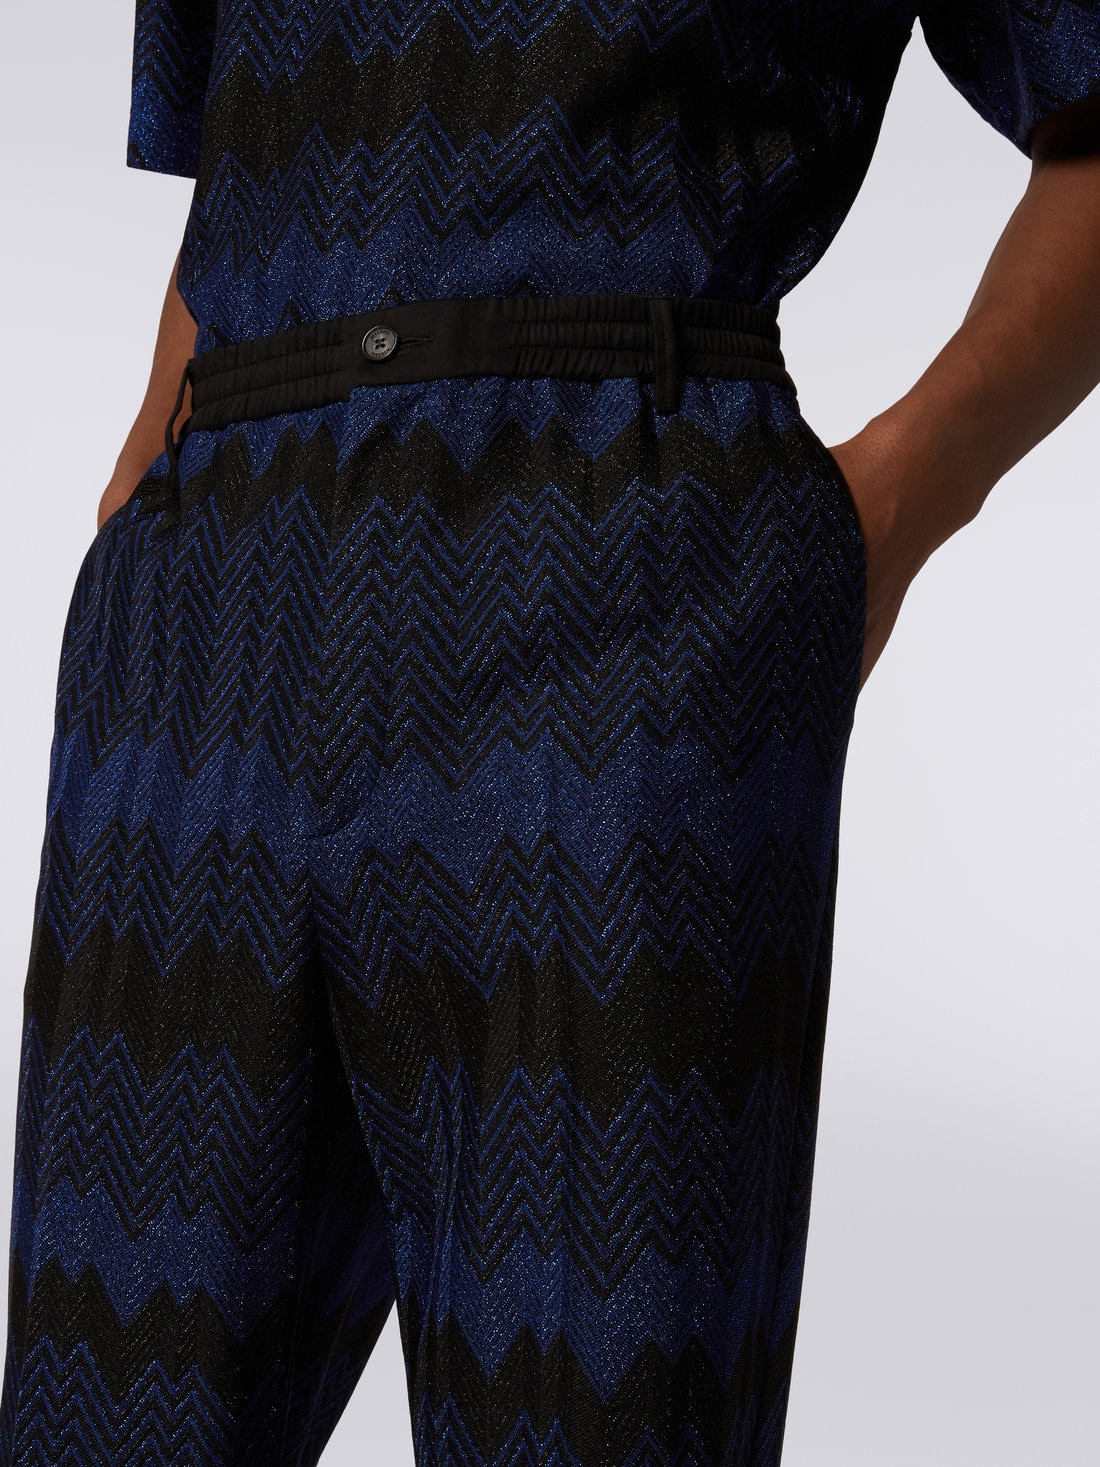 Zigzag viscose trousers with lurex, Blue - US23WI0HBR00O1S72B3 - 4